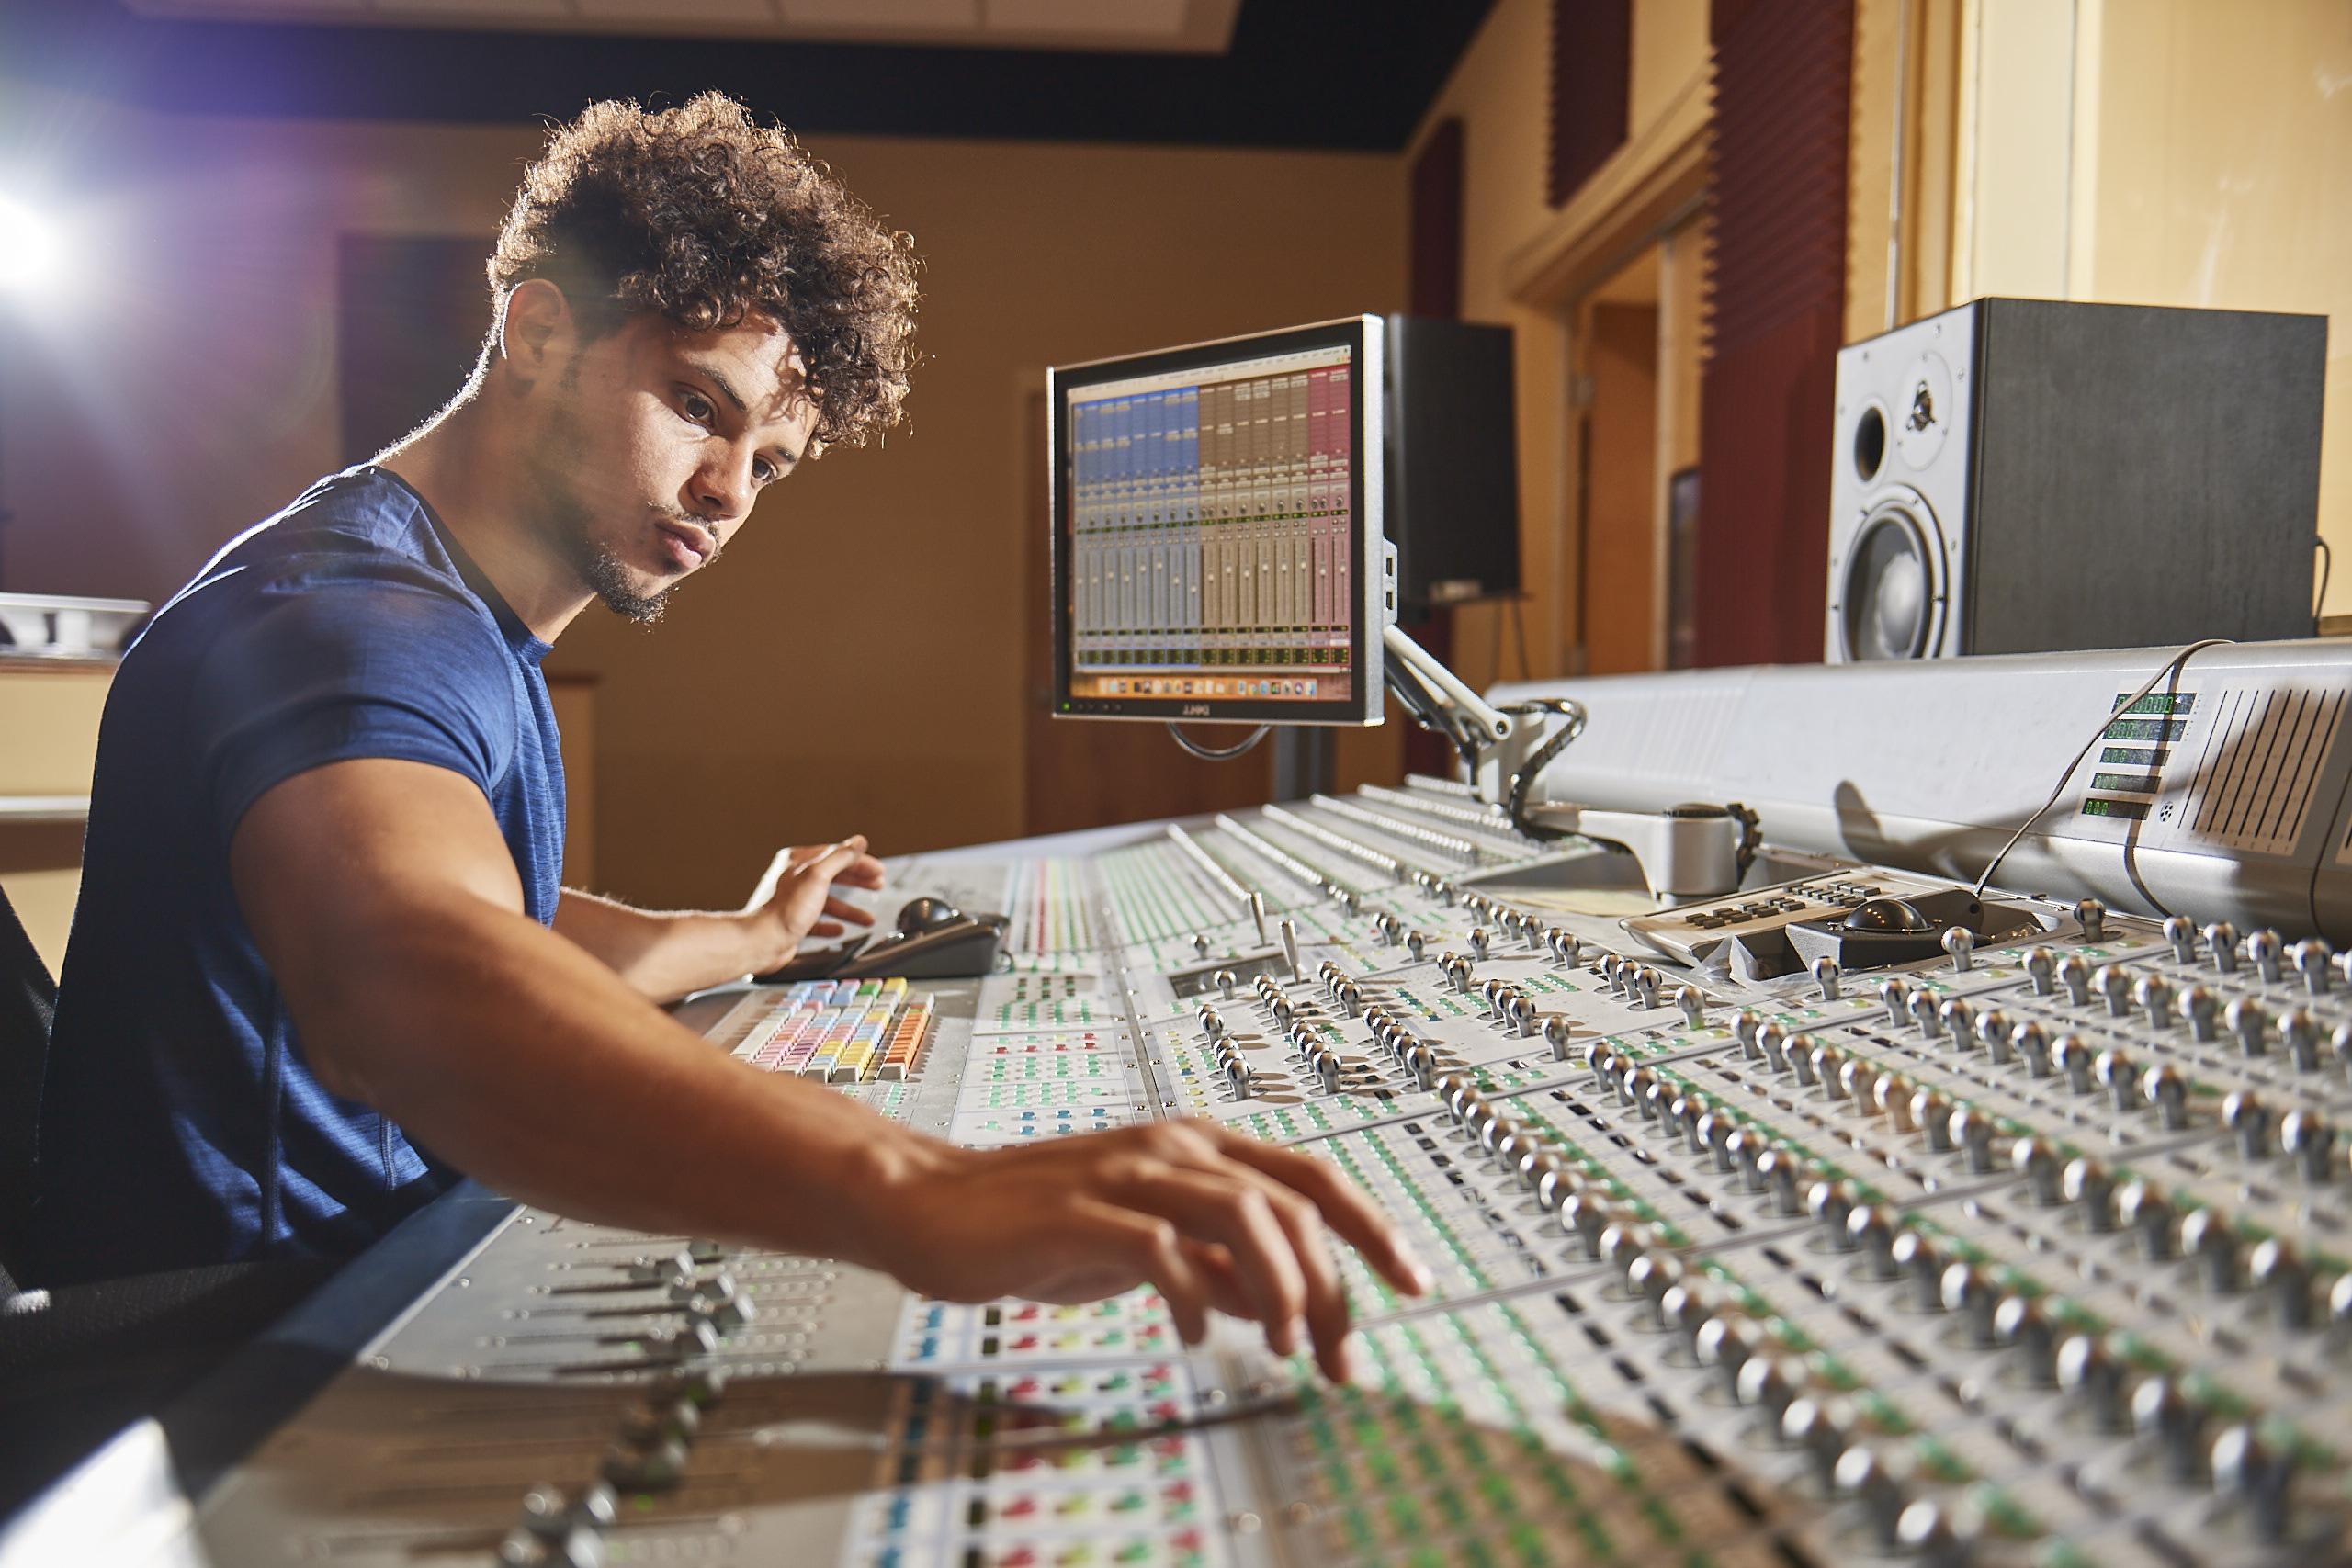 A male student adjusting some settings on a console in a recording studio